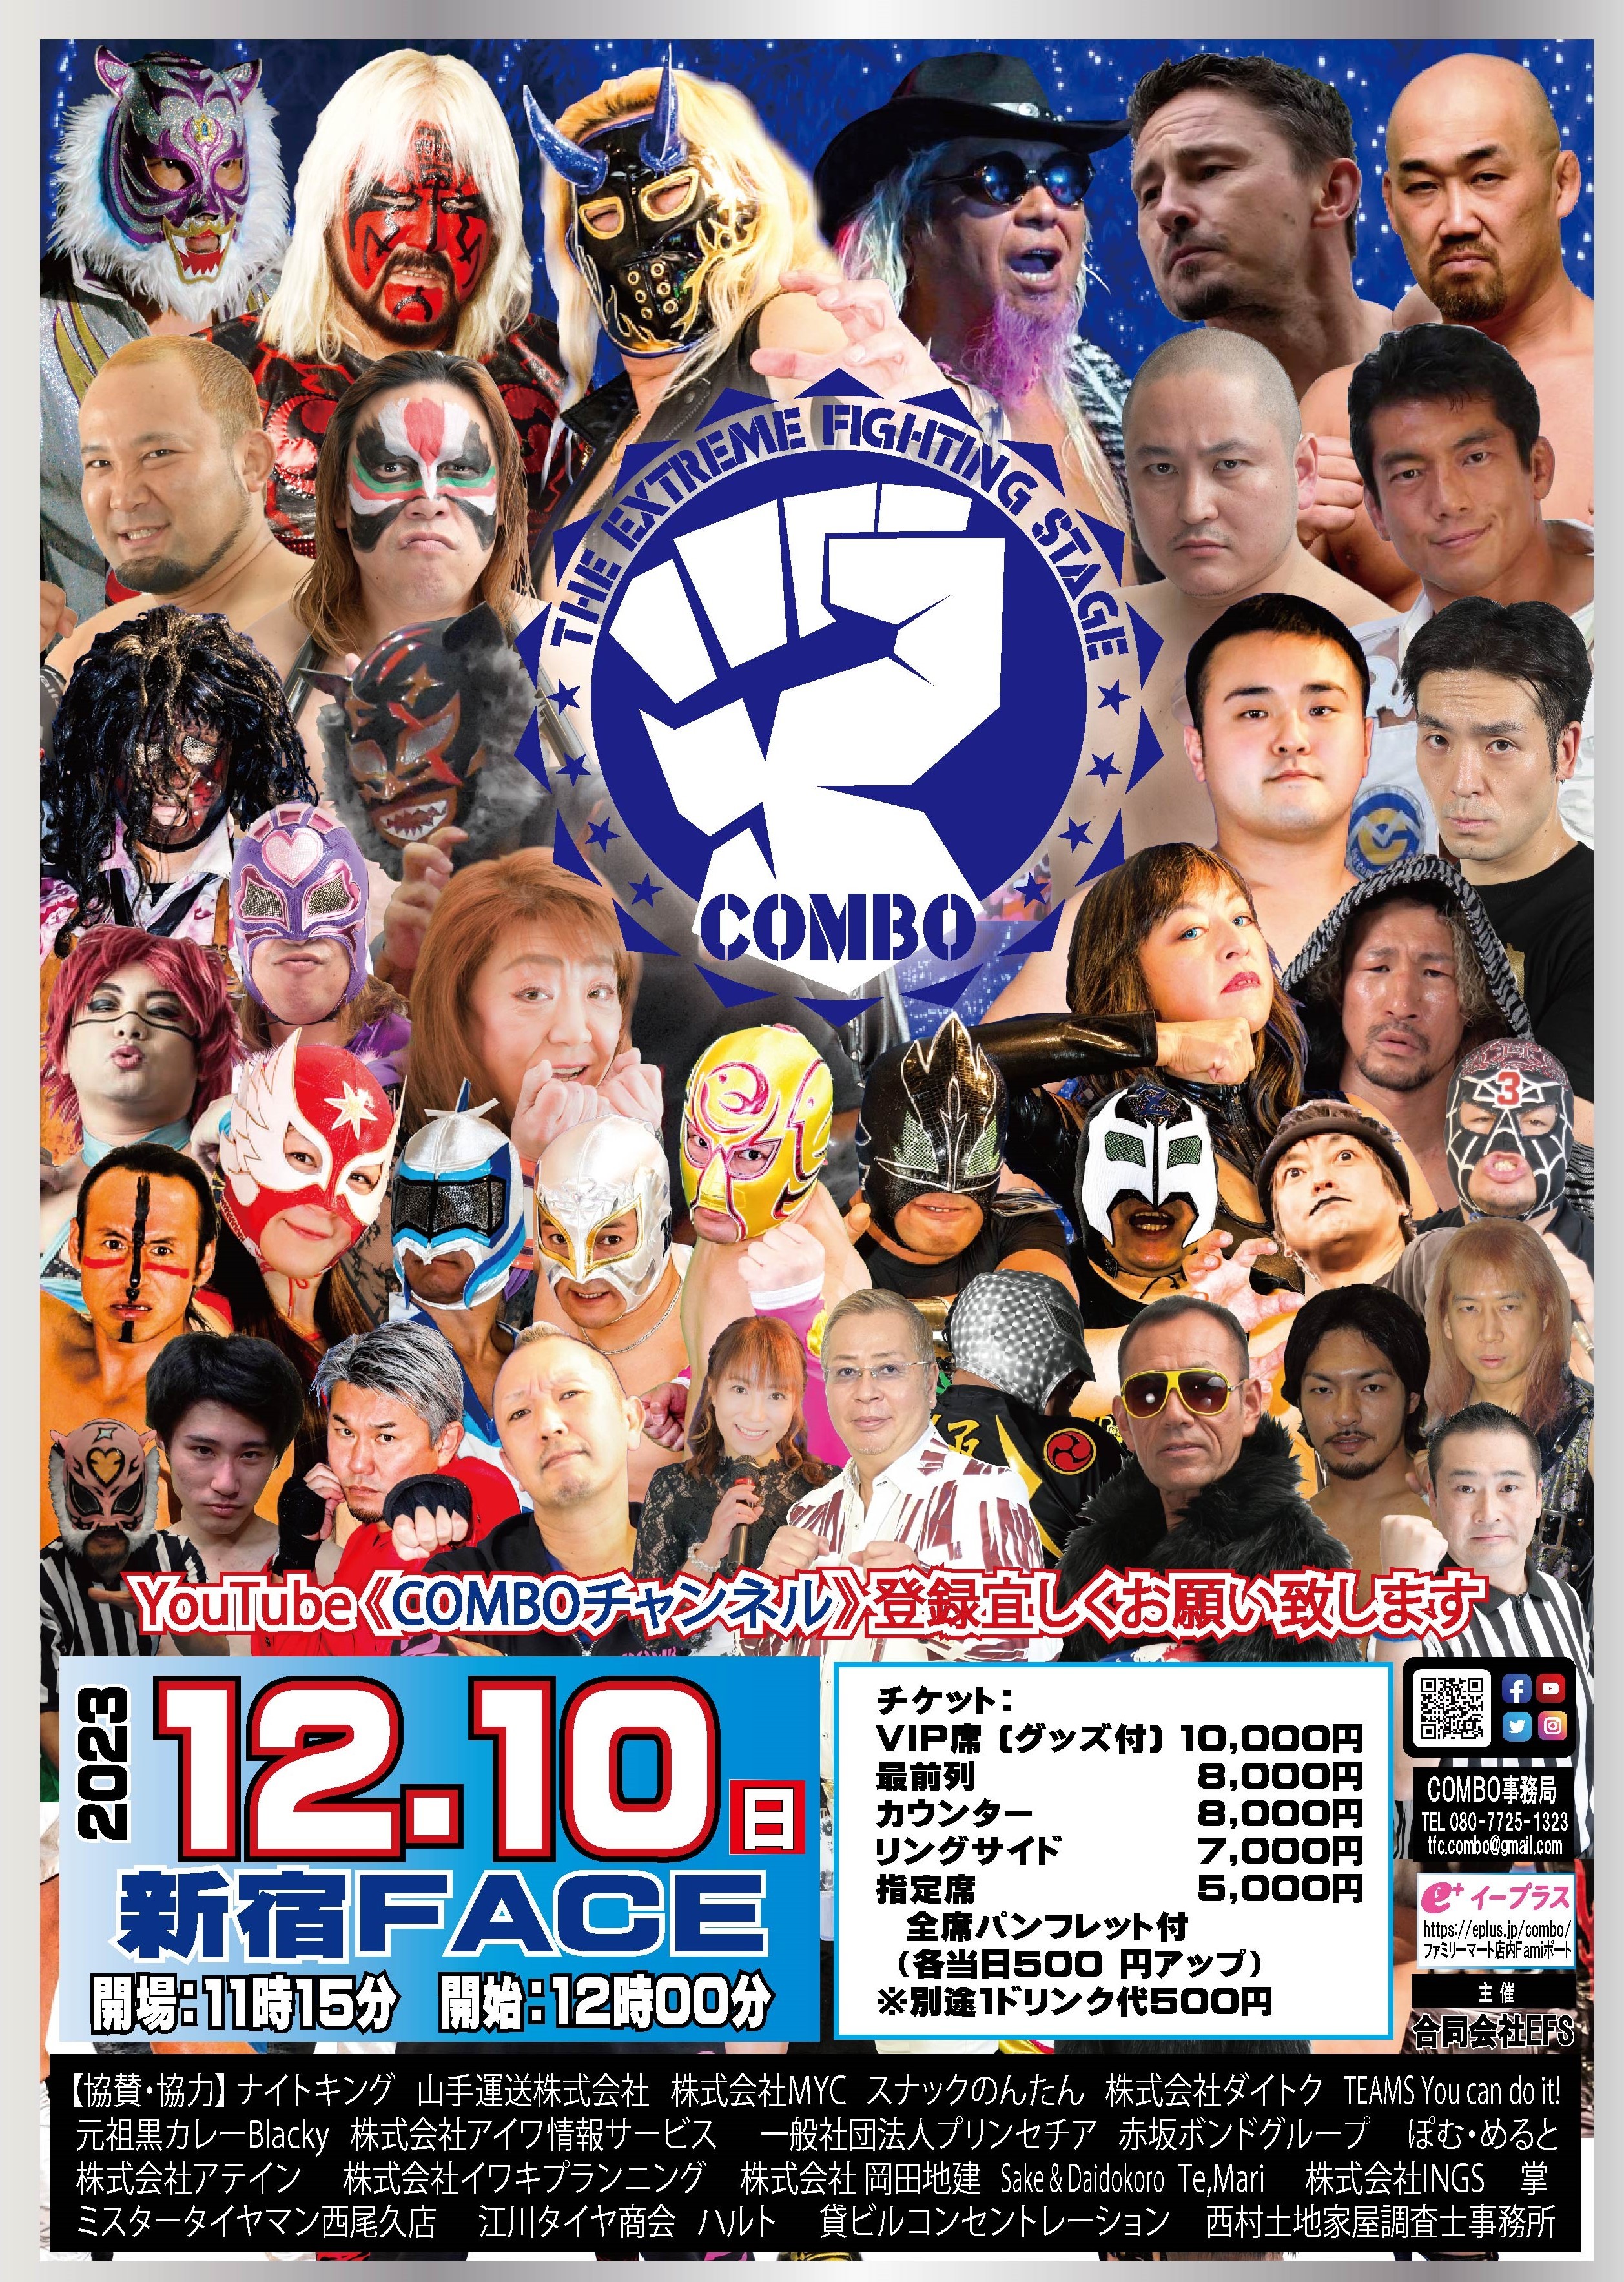 『THE EXTREME FIGHTING STAGE COMBO』が12月10日（日）に新宿FACEで開催される